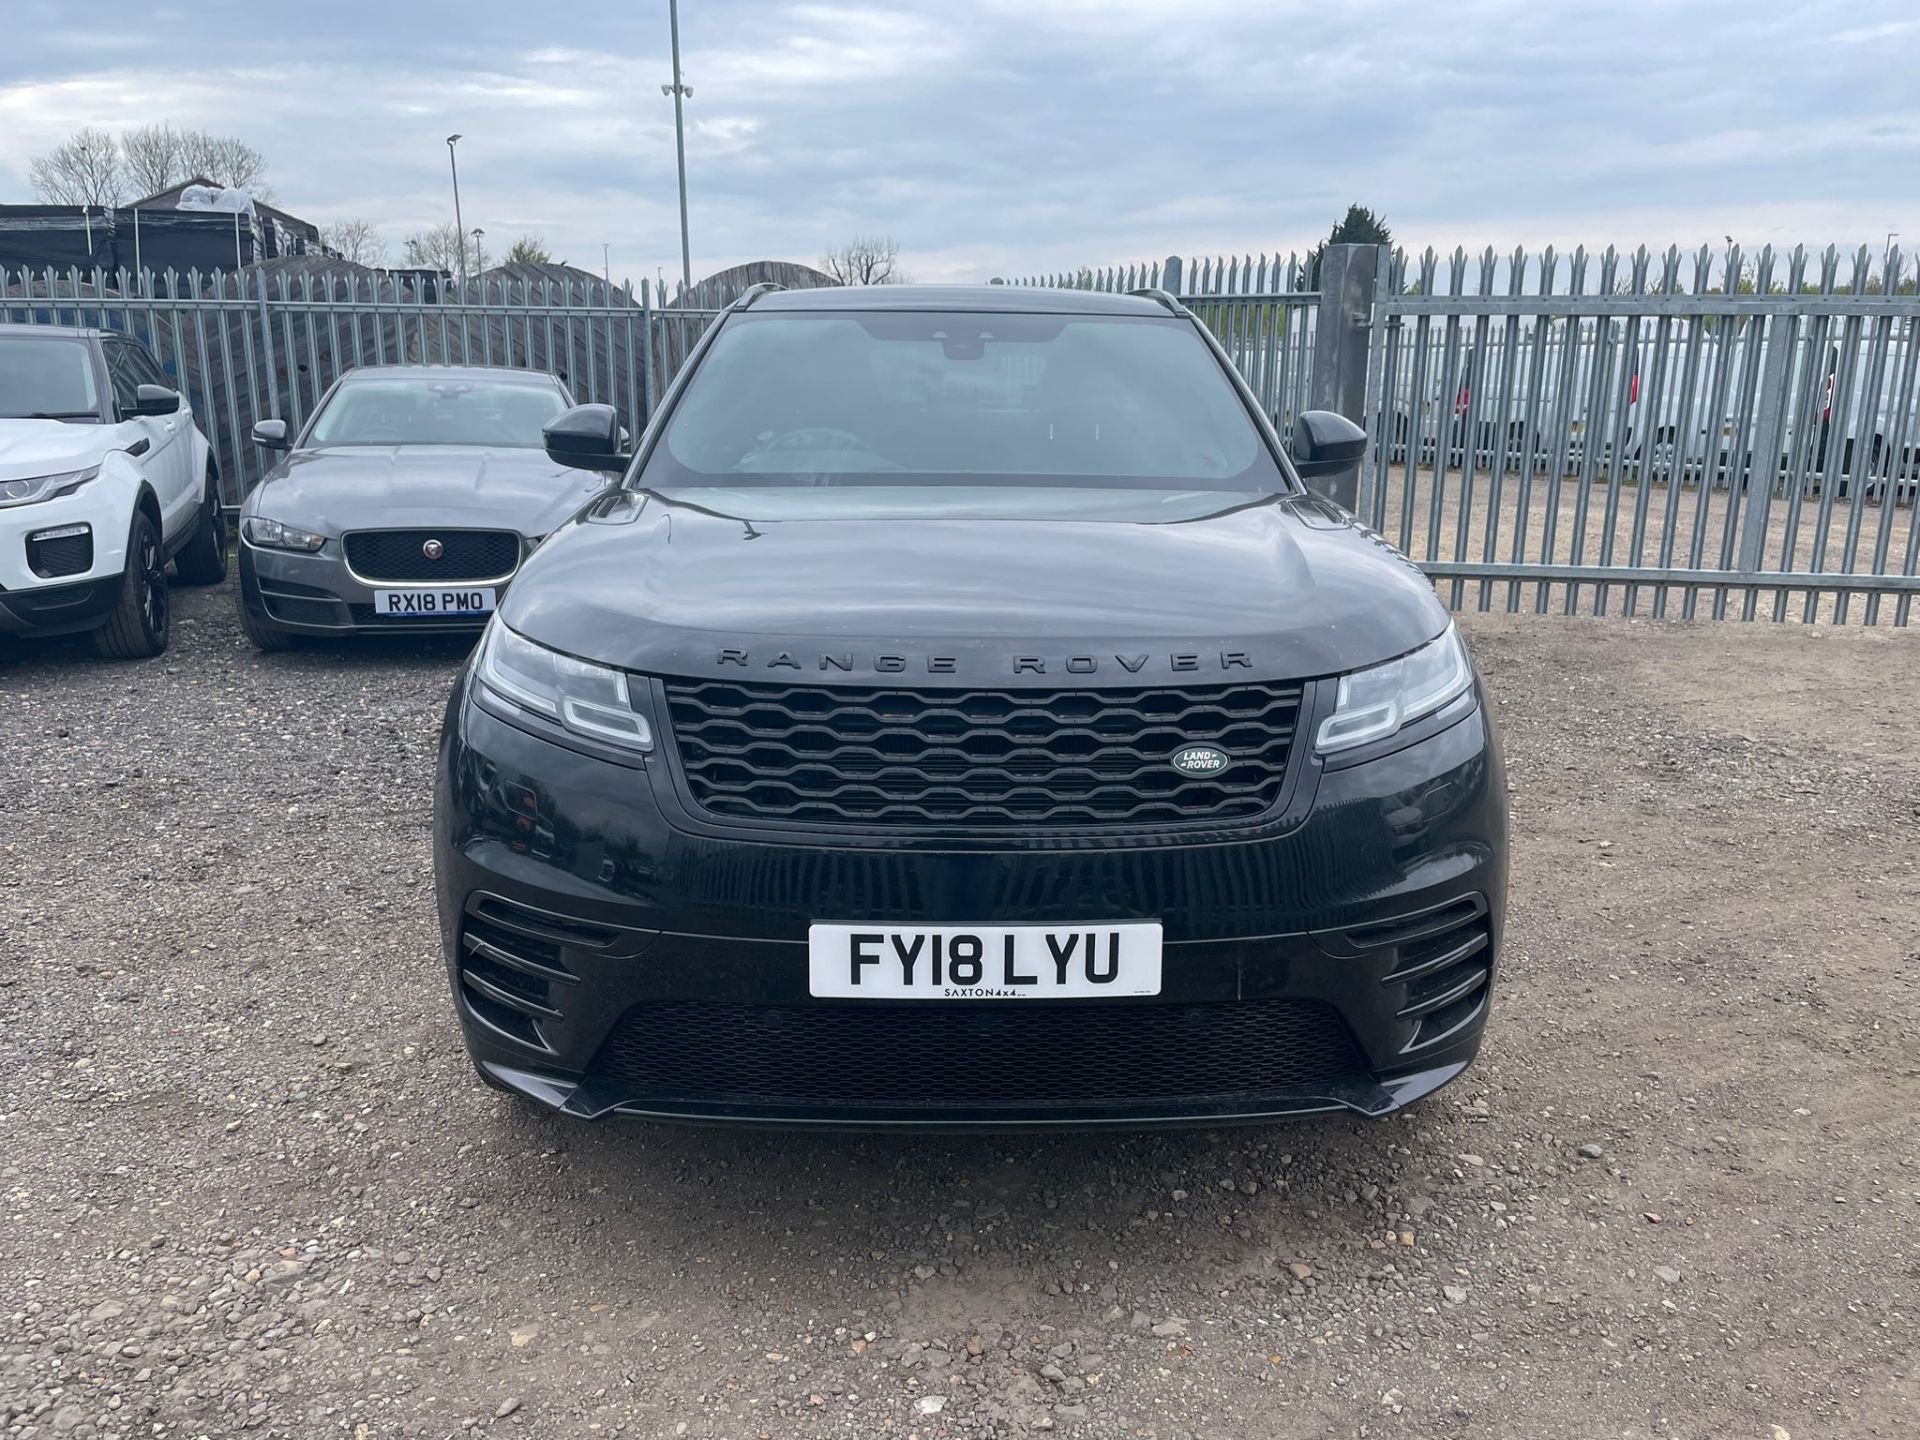 Land Rover Range Rover Velar 2.0 D240 R-Dynamic S 2018 '18 Reg' 4WD - Panoramic Roof- ULEZ Compliant - Image 2 of 33